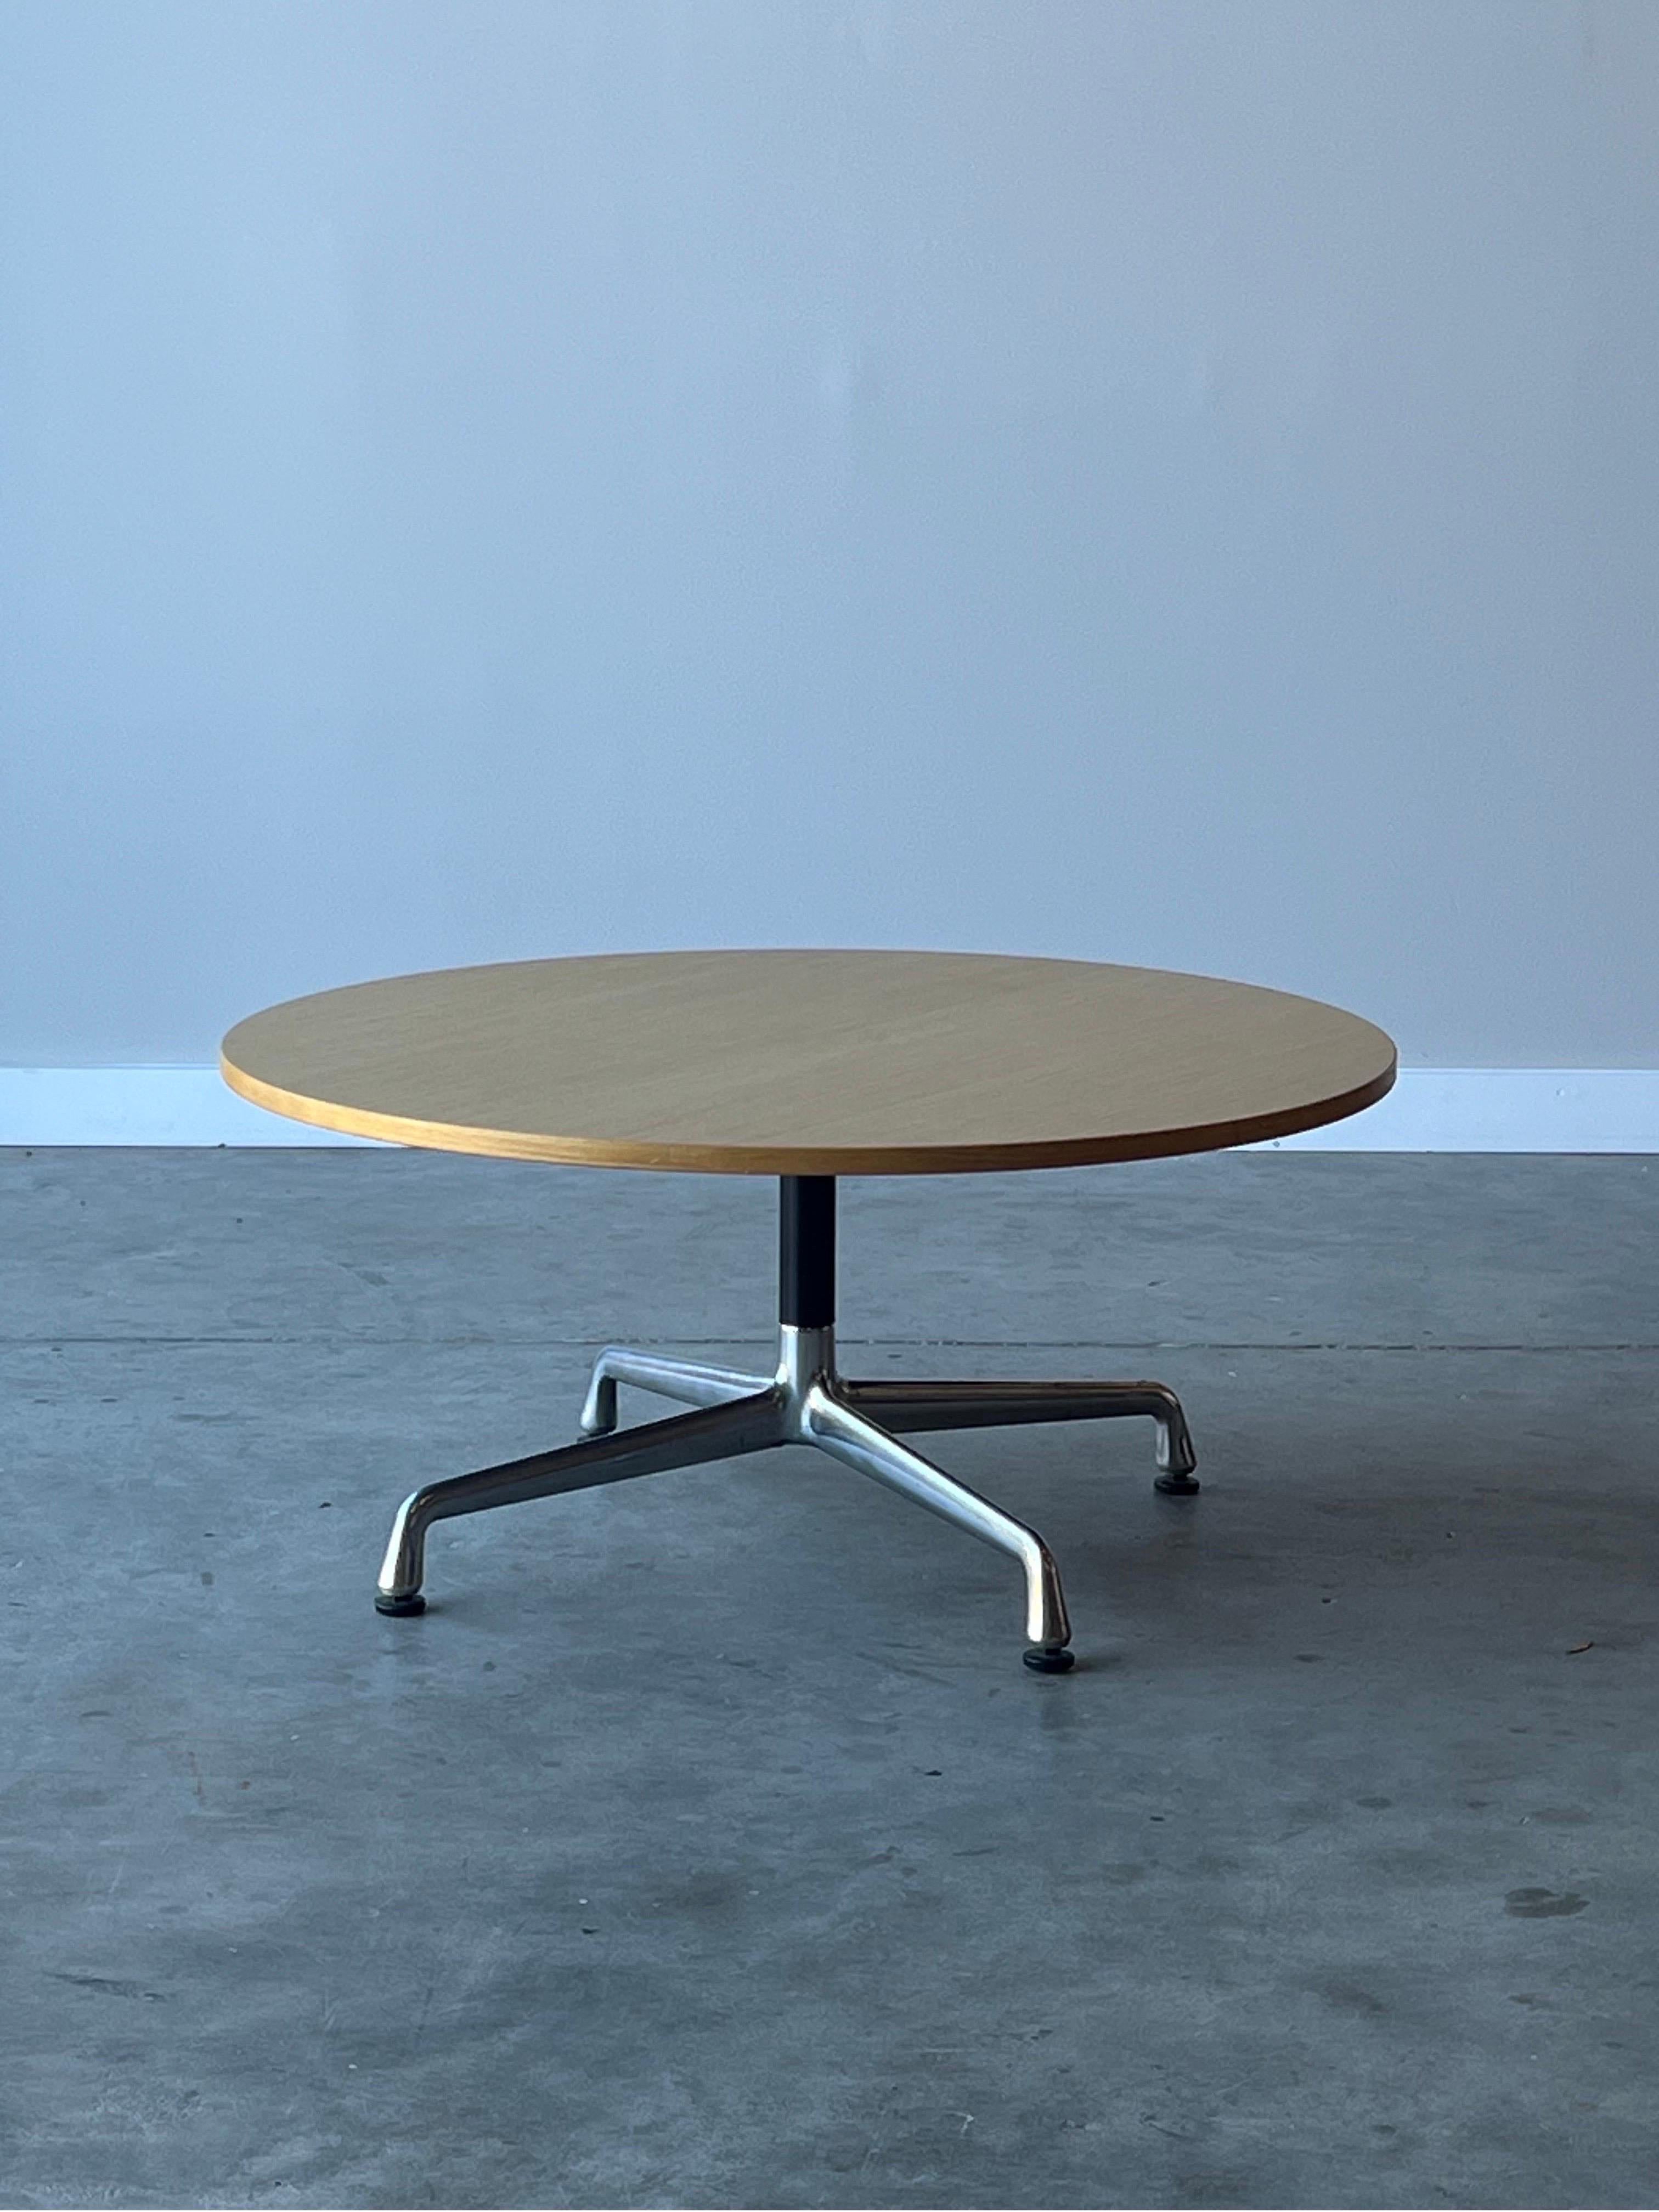 “Aluminum Group” coffee table designed by Charles and Ray Eames for Herman Miller. Sleek design with a round wooden top. Aluminum “X” shaped base. Sturdy, simple, yet great design. In good condition with minor wear consistent with use.